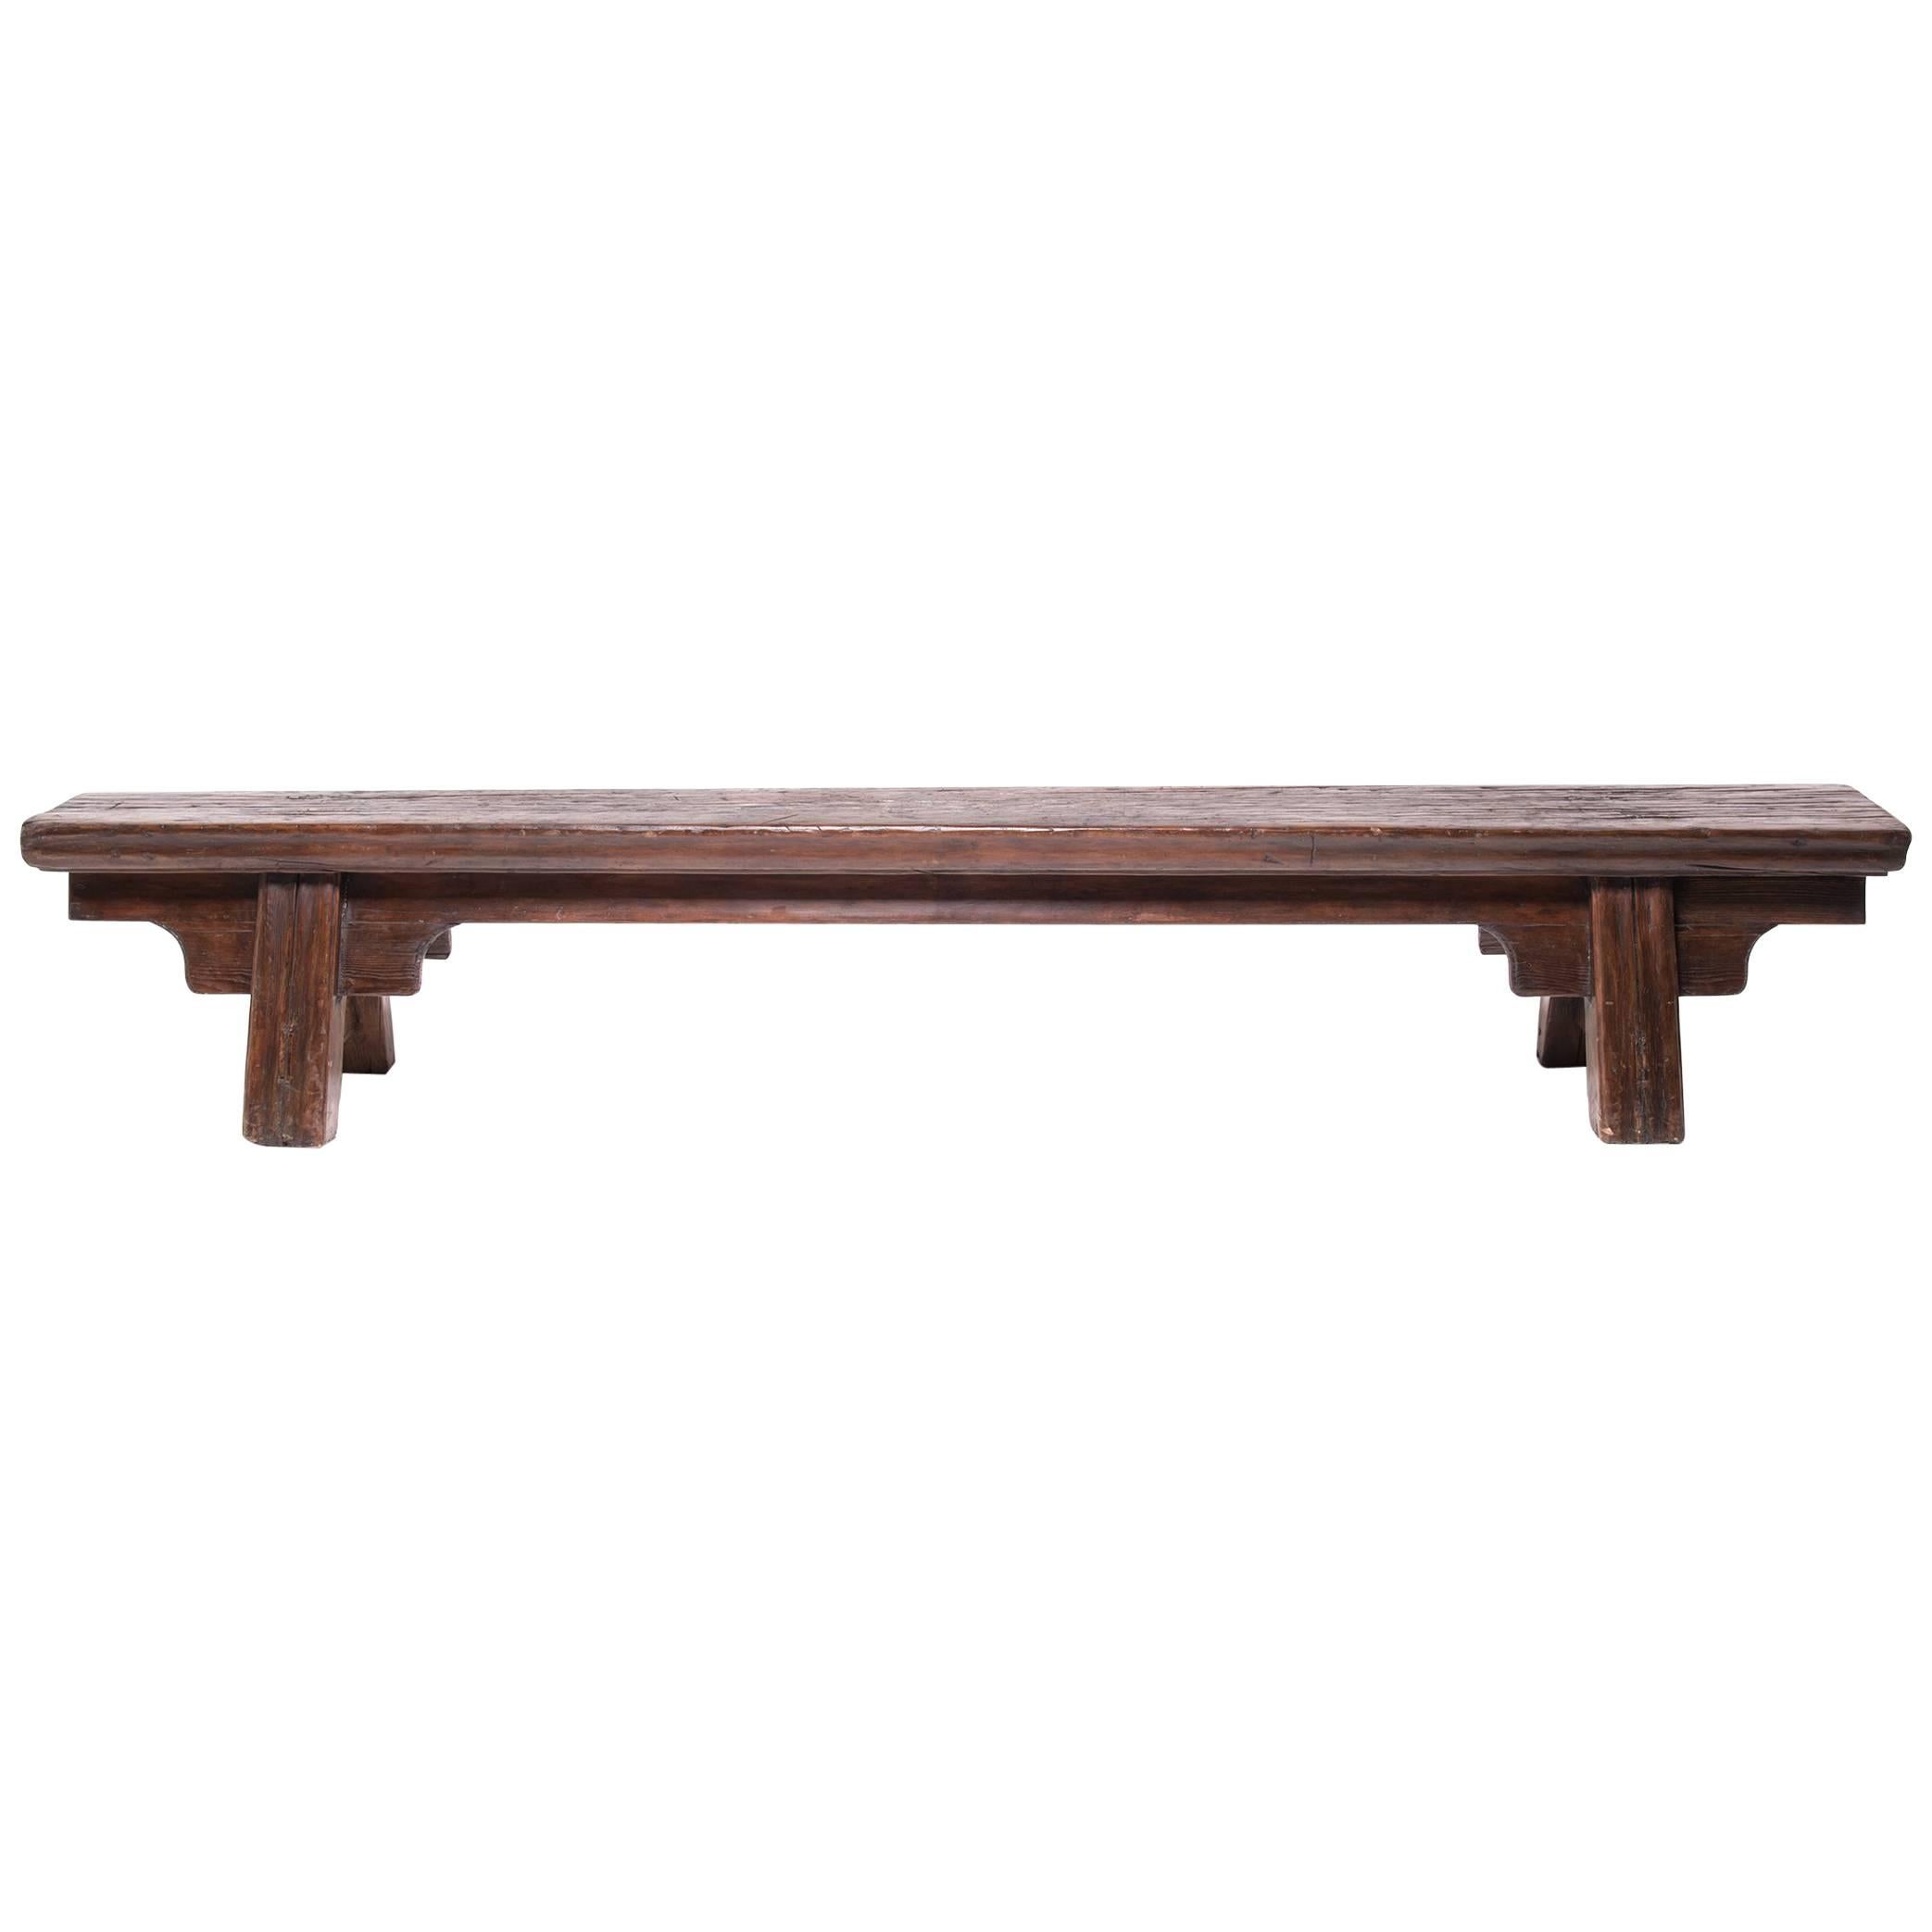 Provincial Chinese Elmwood Bench, c. 1850 For Sale